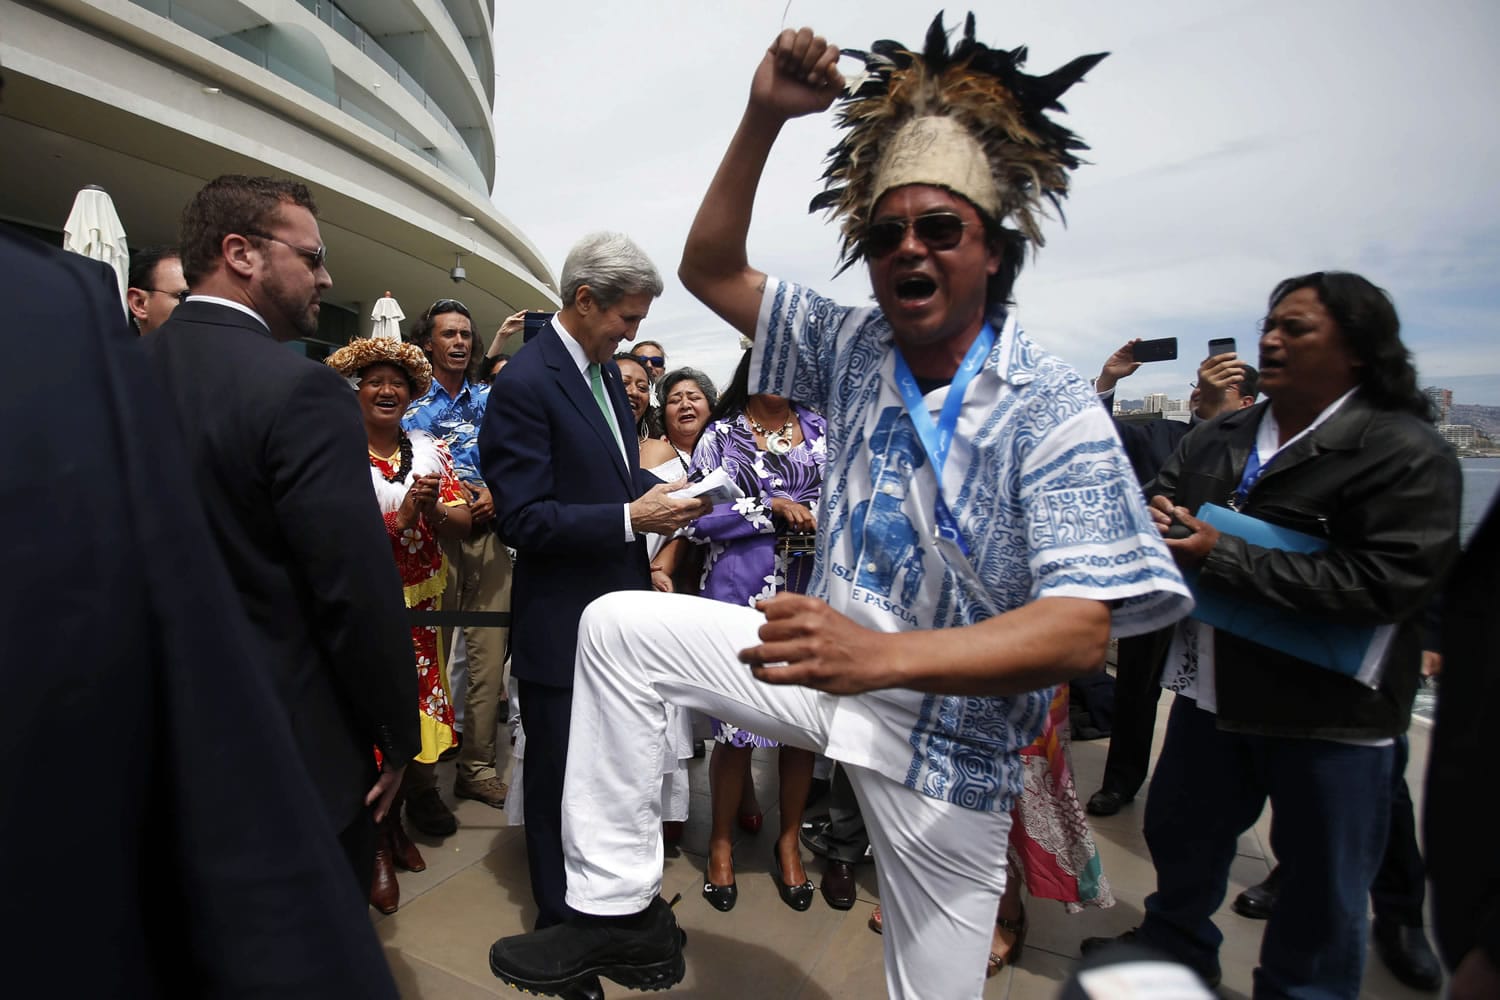 A man from Easter Island dances as U.S. Secretary of State John Kerry, behind, is gifted an Easter Island flag, on the sidelines of the Our Ocean international conference on marine protection in Vina del Mar, Chile, on Monday. President Barack Obama declared new marine sanctuaries in Lake Michigan and the tidal waters of Maryland on Monday, while Chile blocked off a vast expanse of the Pacific Ocean near the world-famous Easter Island from commercial fishing and oil and gas exploration.